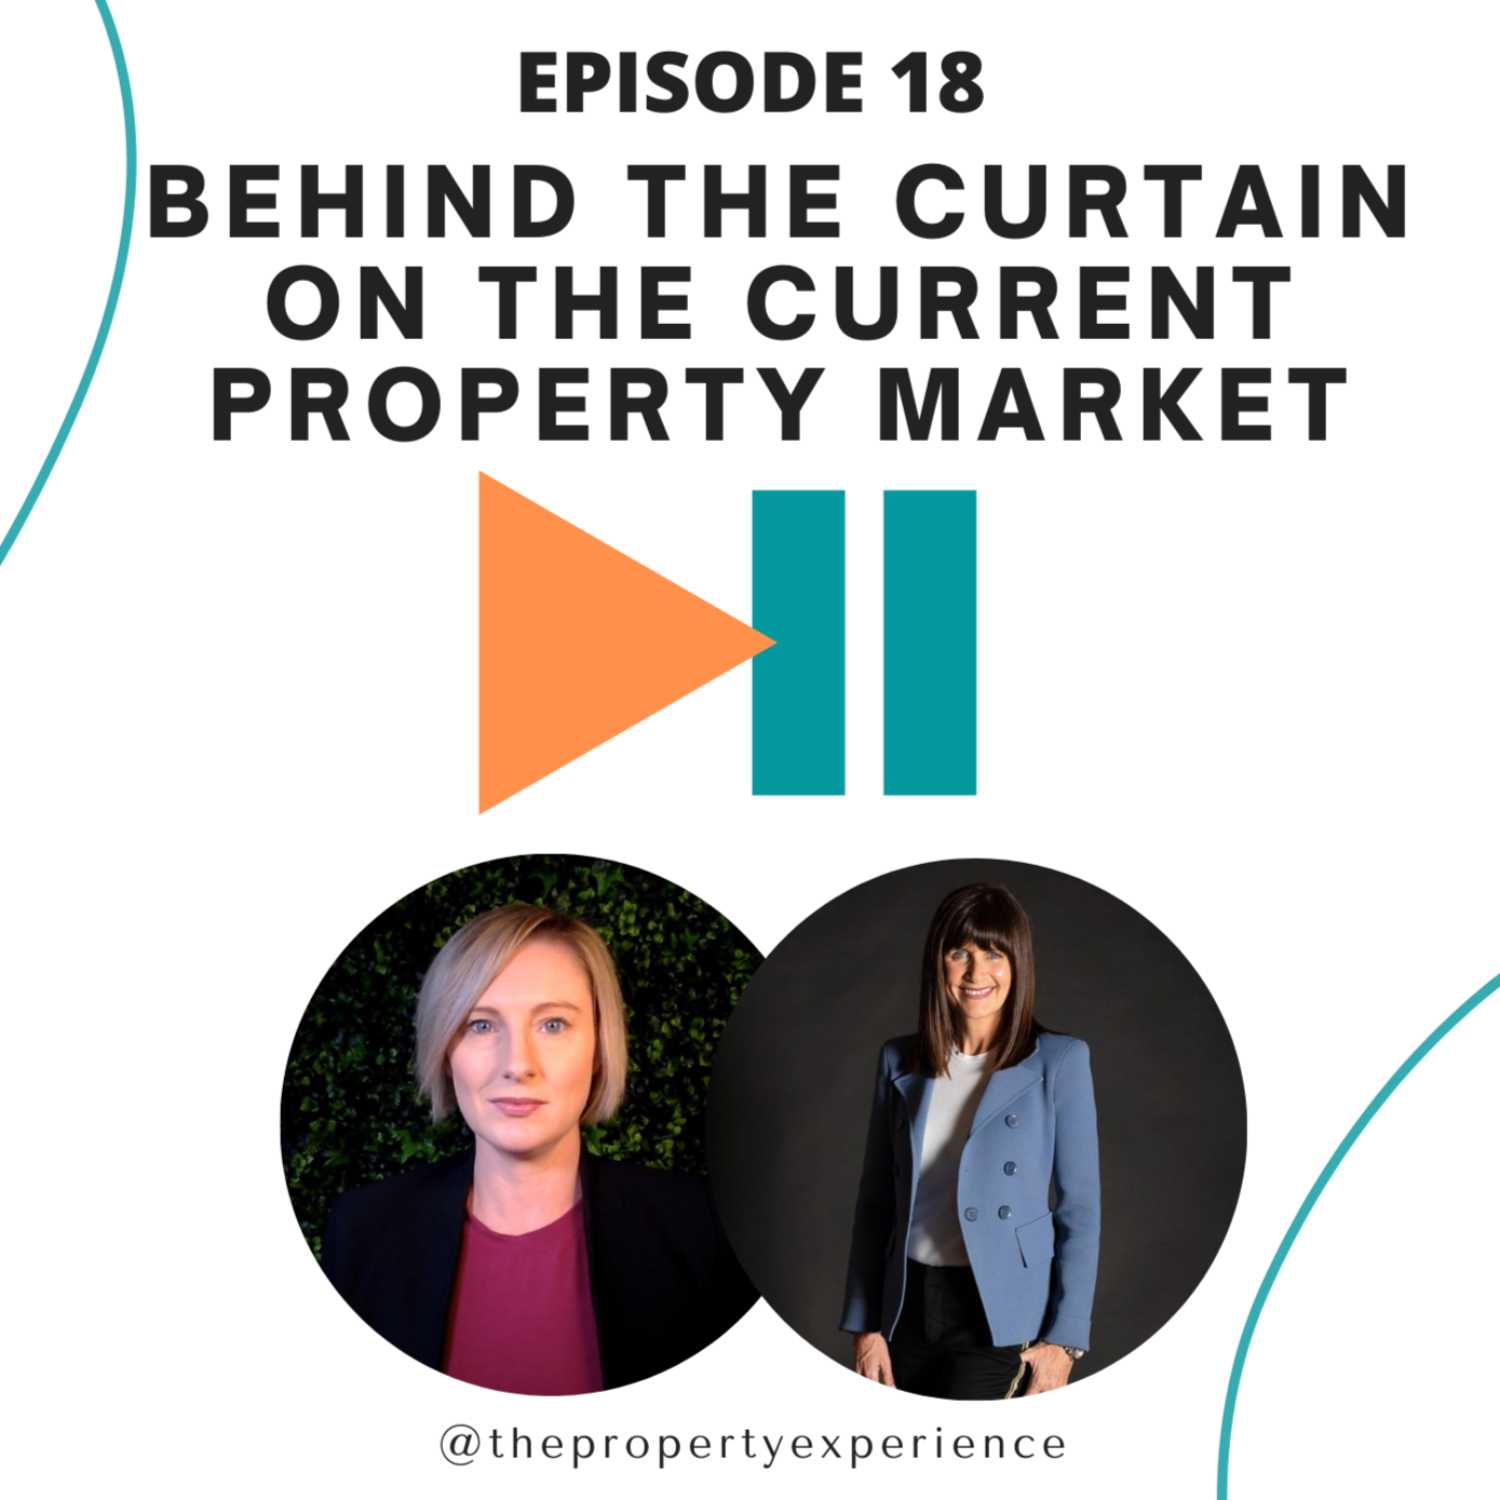 Behind the Curtain on the Current Property Market - The Property Experience Podcast